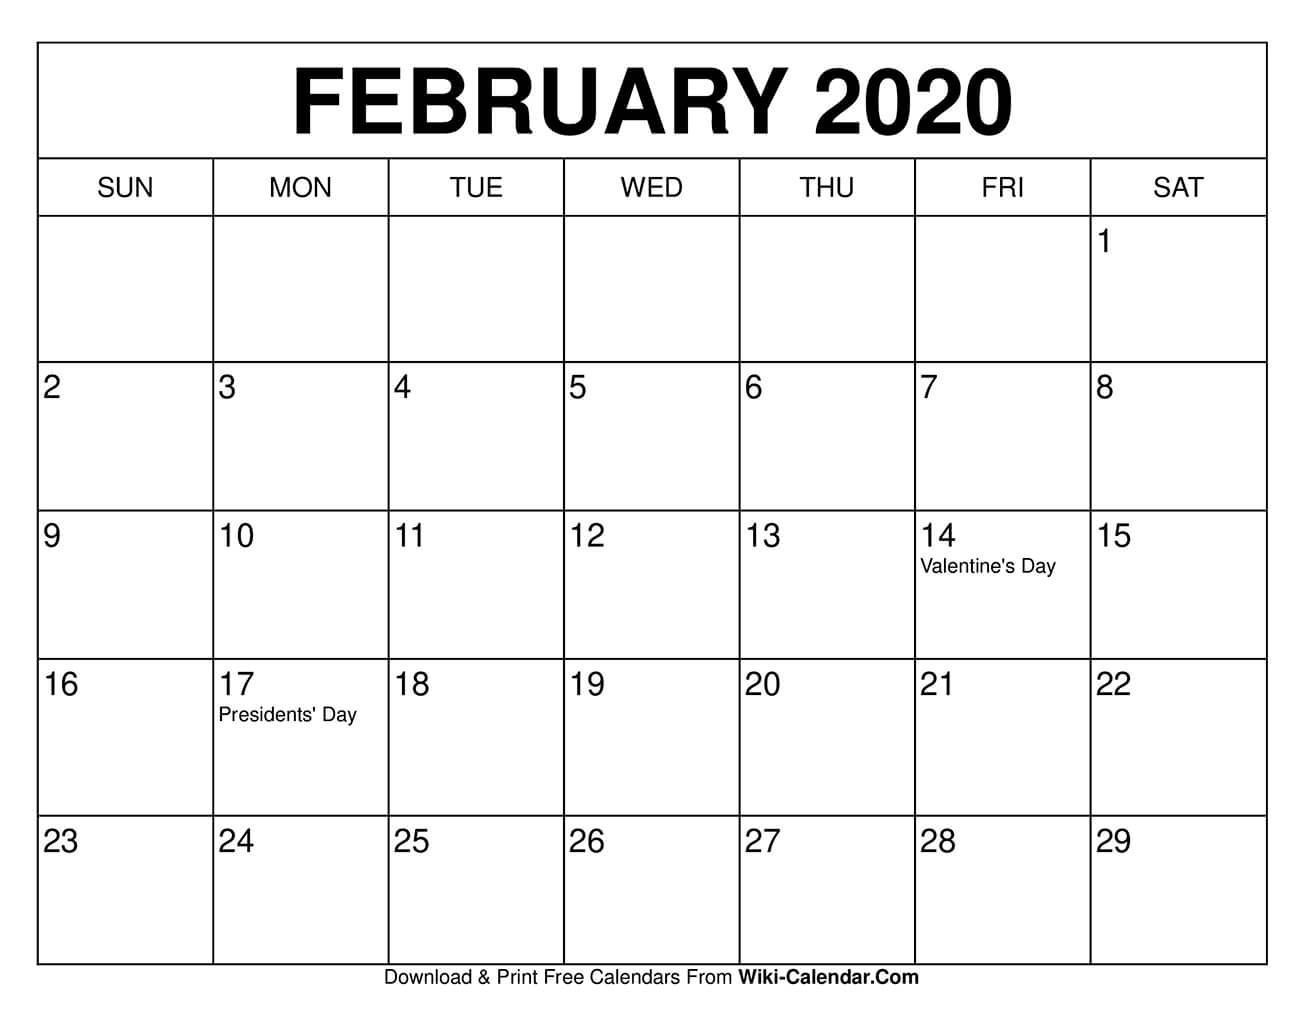 Effective Calendar I Can Download And Edit In 2020 | Free